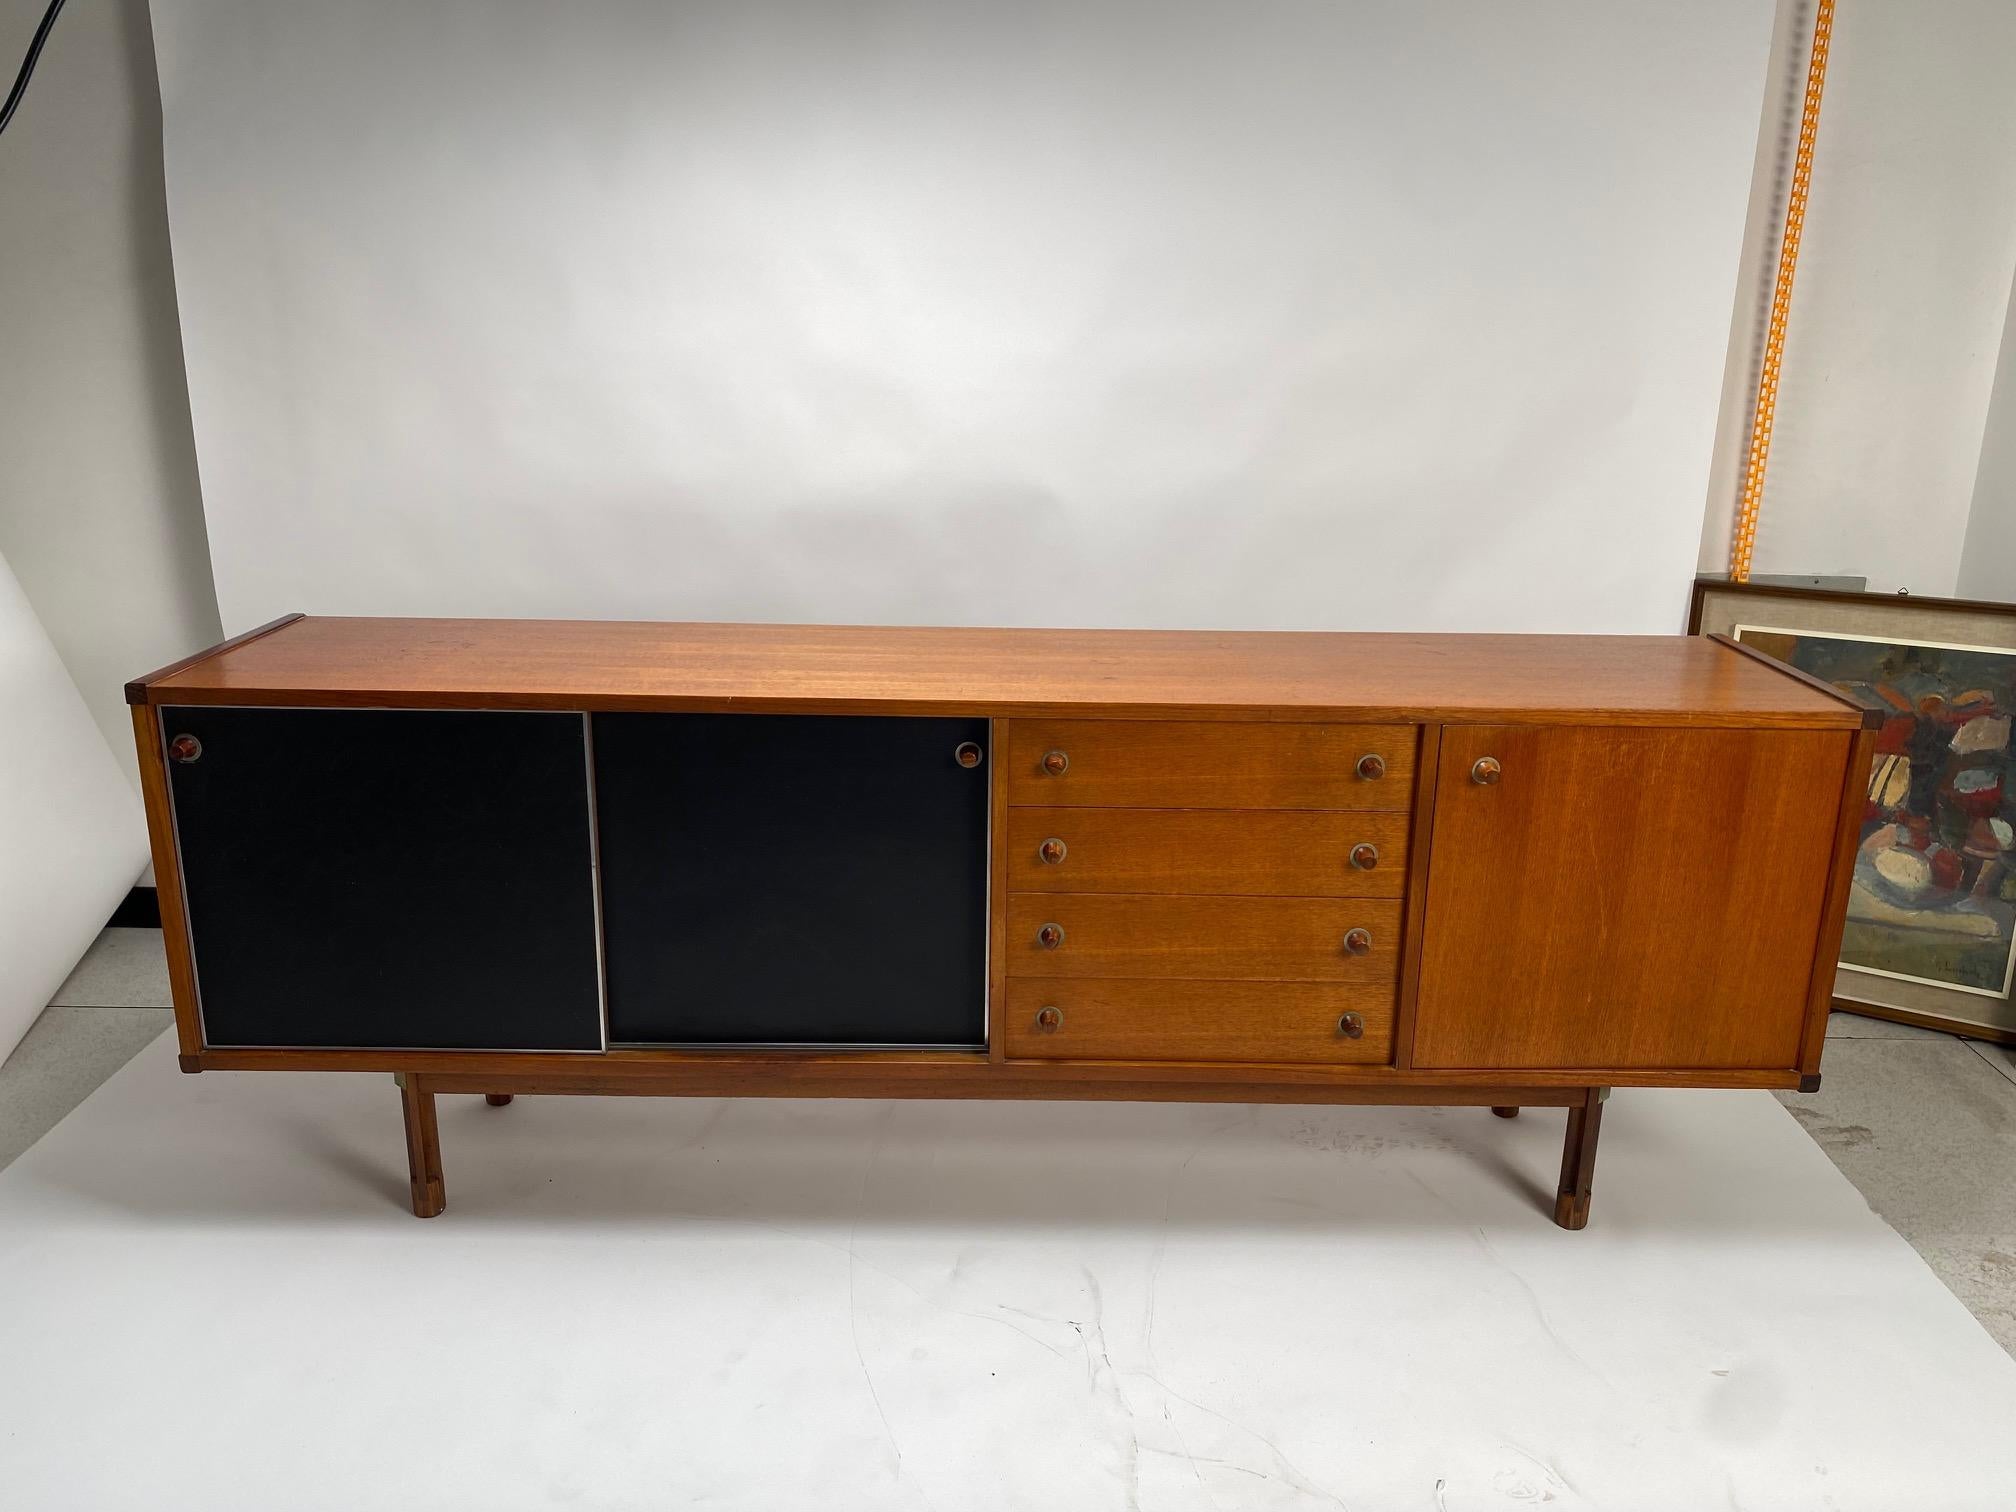 Sideboard designed by architect George Coslin for the important Italian company 3V Arredamenti in the 60s. It has 4 drawers with 3 doors.